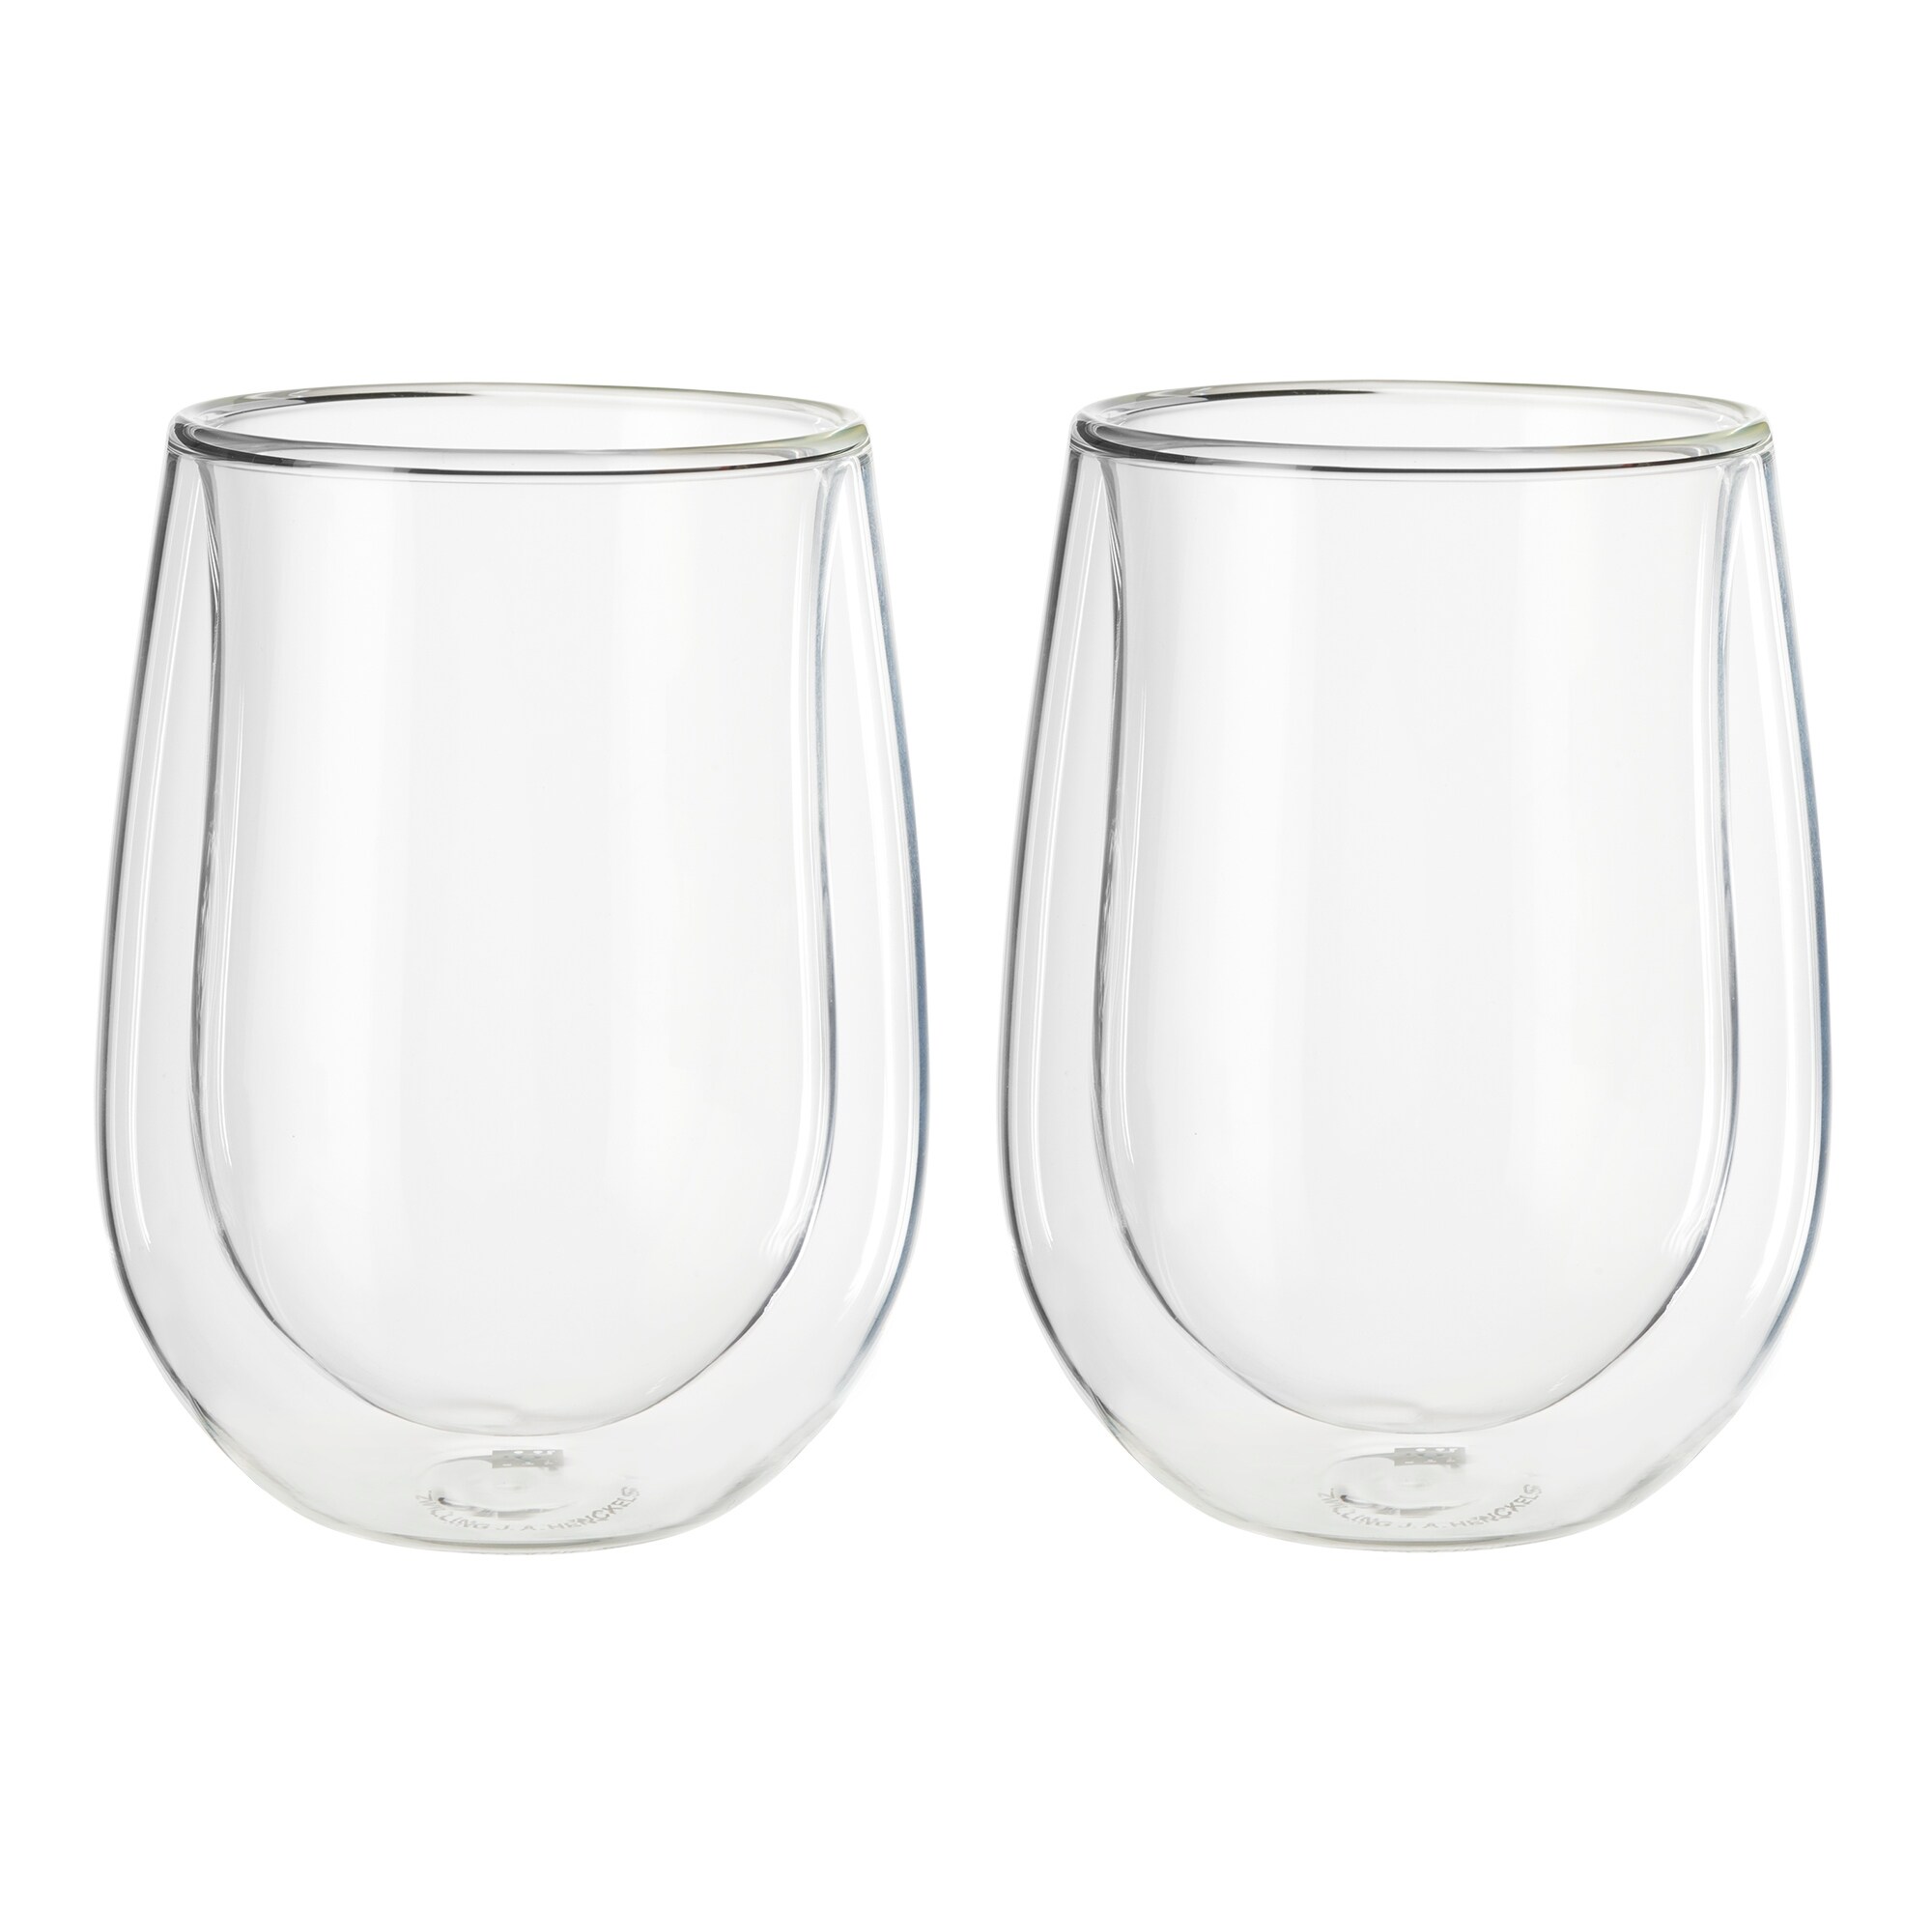 https://ak1.ostkcdn.com/images/products/is/images/direct/d0a1a49d369c64da8691916e8434dcc03da912fe/ZWILLING-Sorrento-2-pc-Double-Wall-Stemless-White-Wine-Glass-Set.jpg